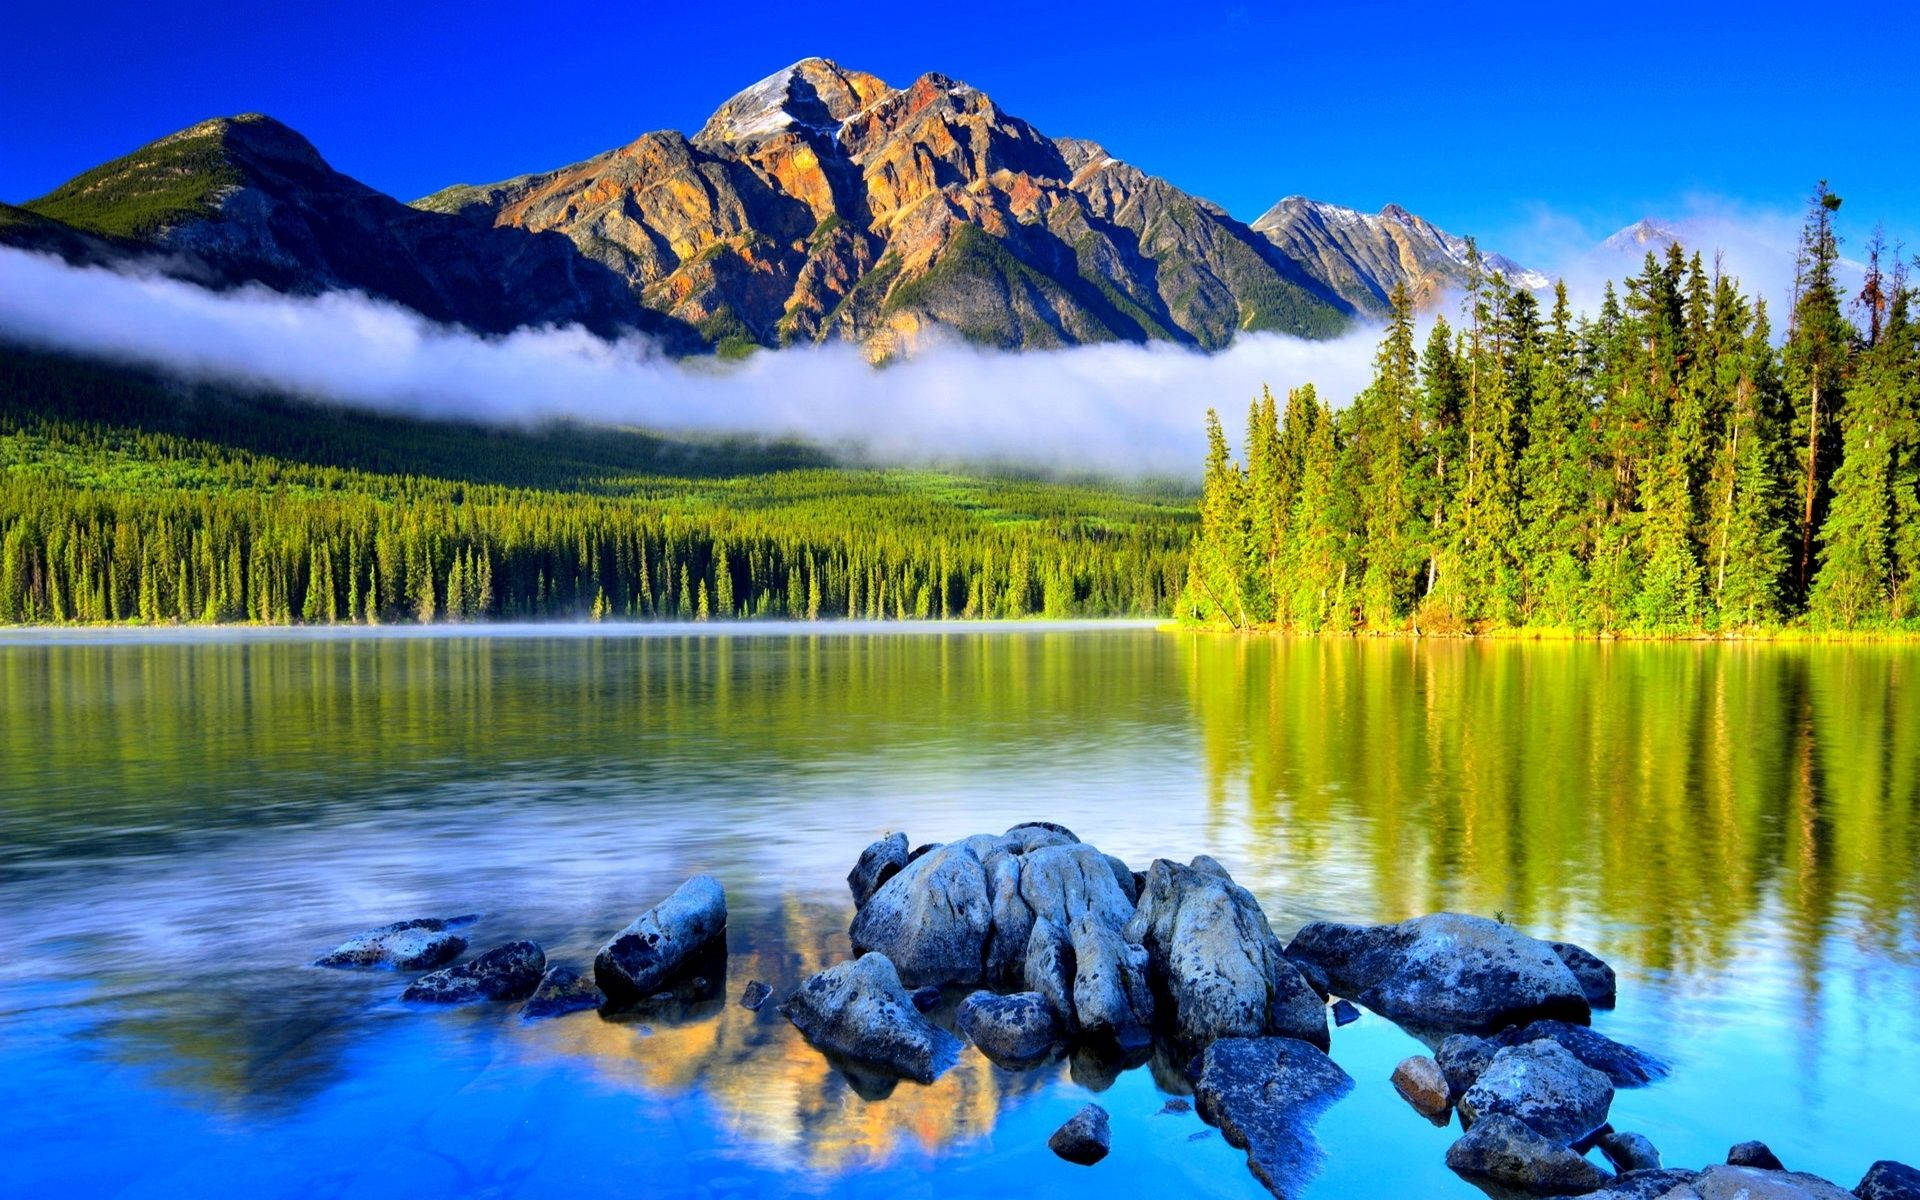 Enjoy the stunning beauty of Nature from this breathtaking Mountain View Wallpaper